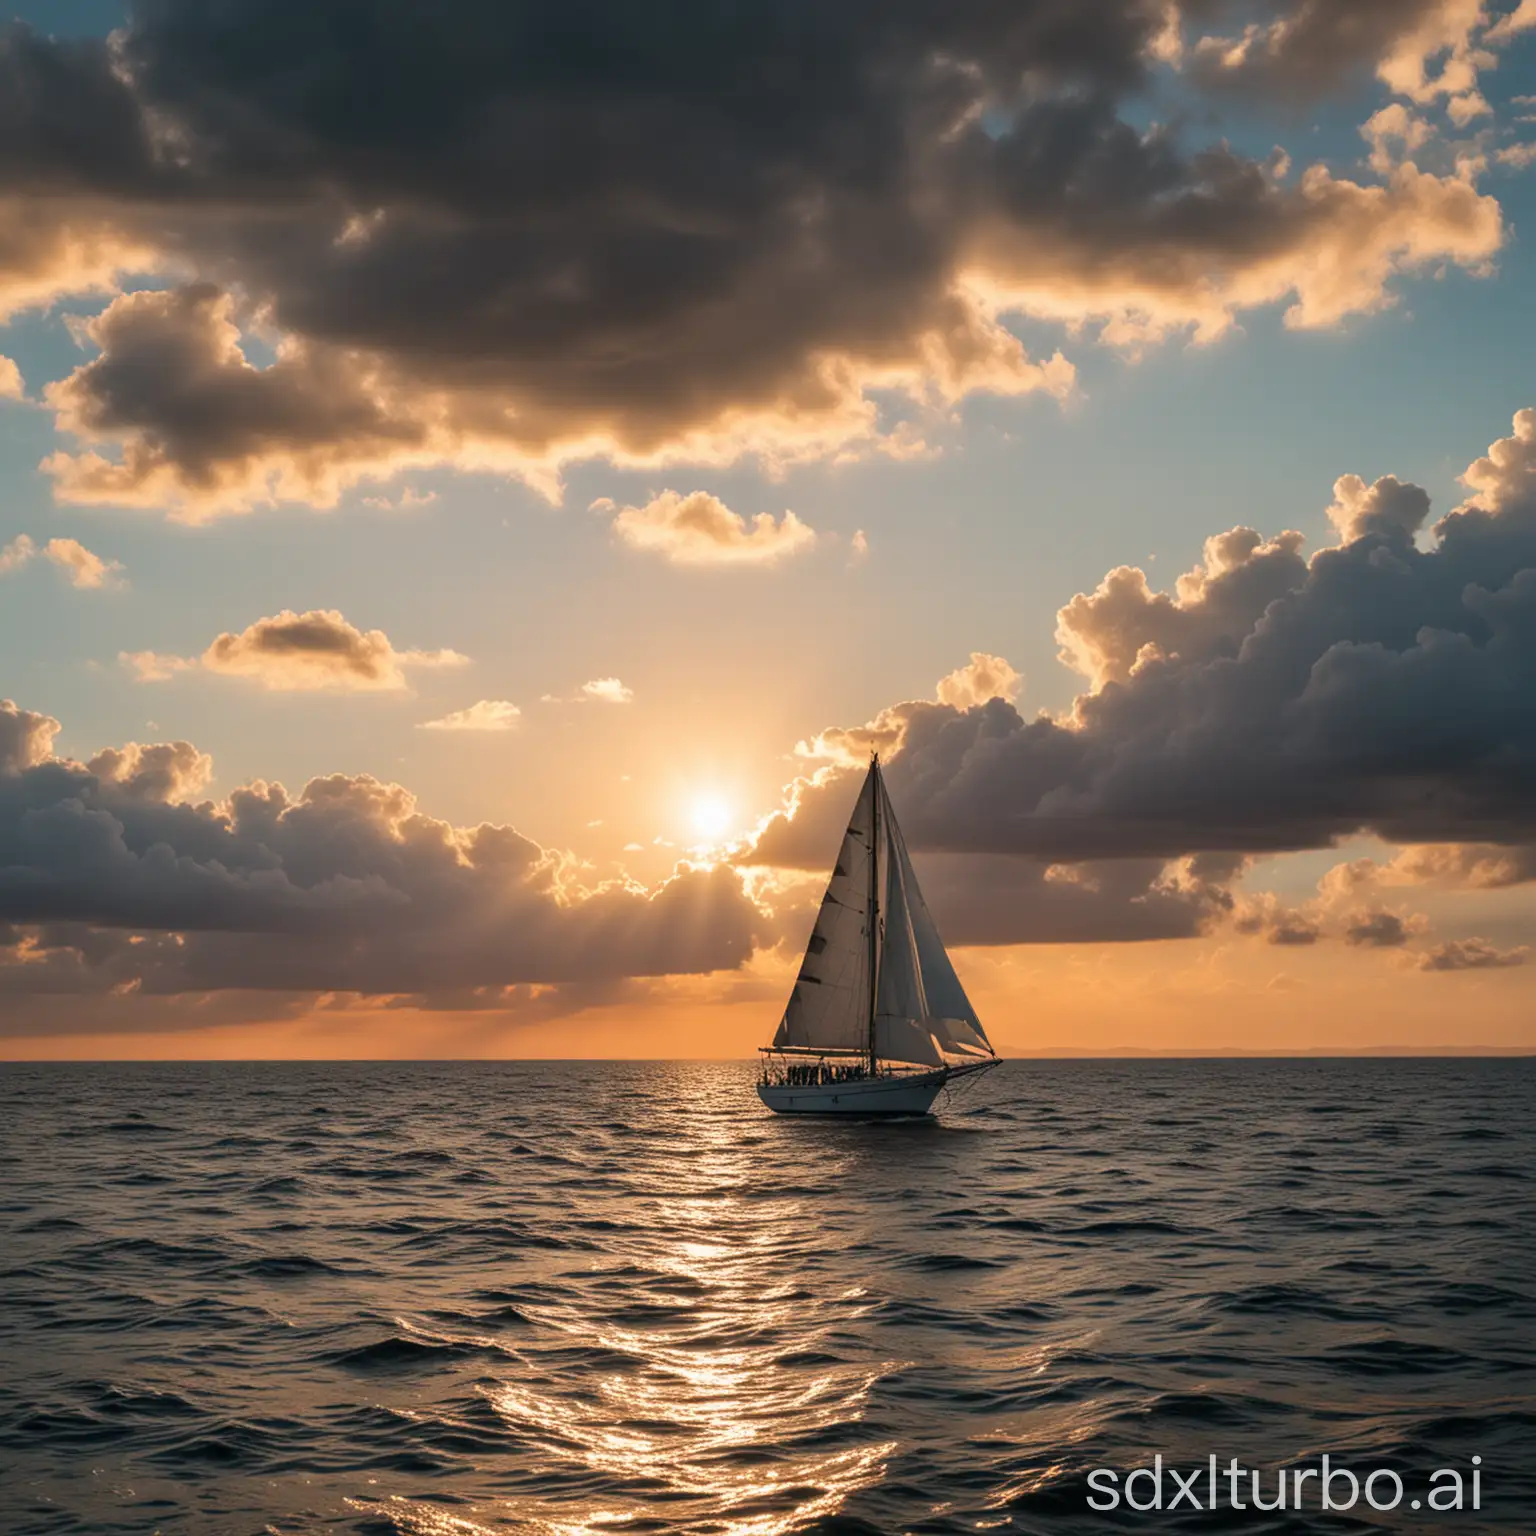 sailboat with white sails from behind getting farther away at sea in the distance at sunset with clouds